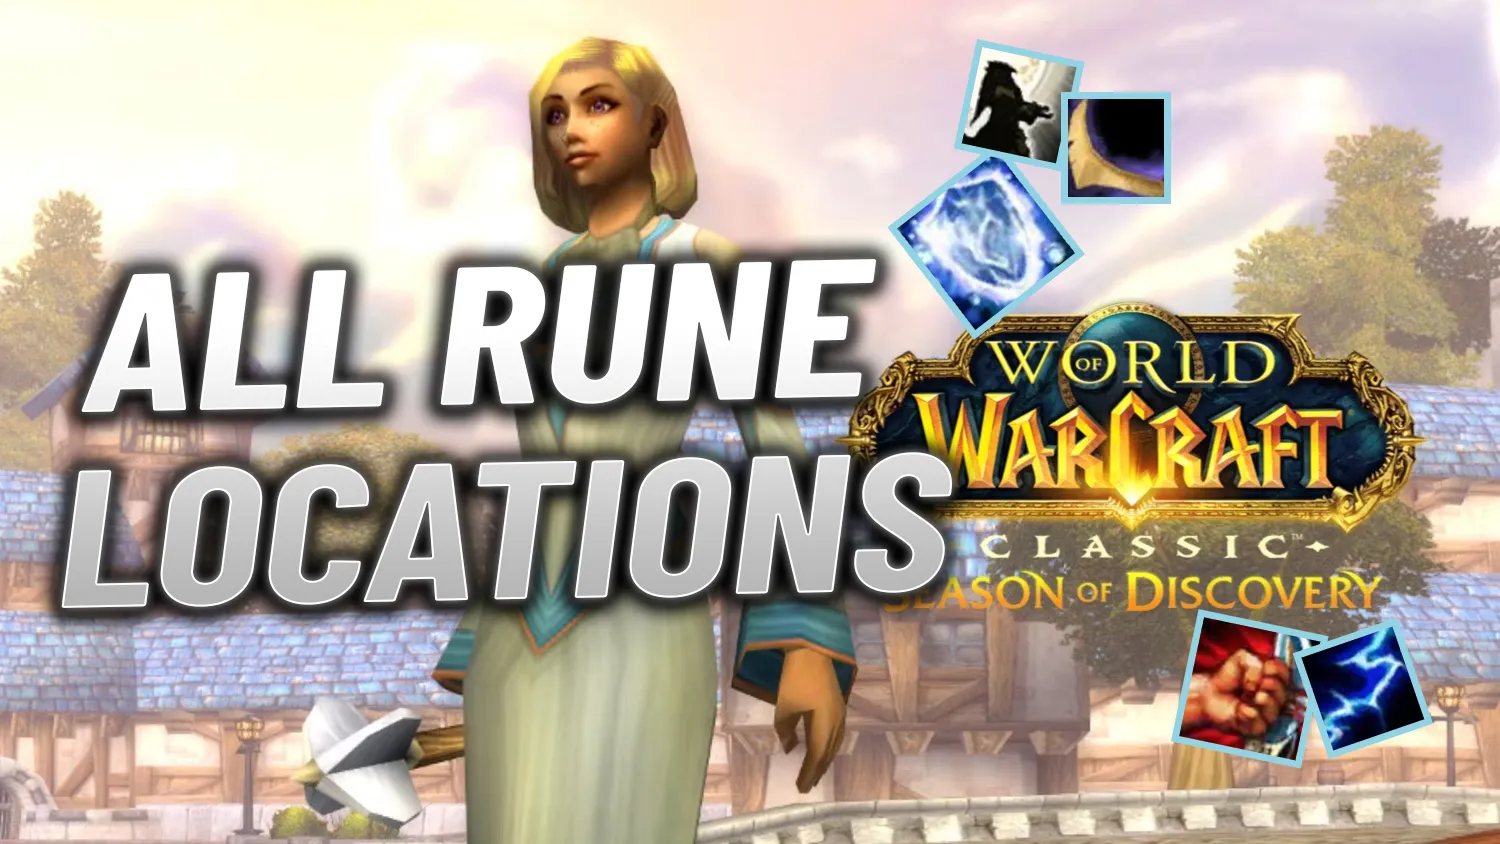 All Rune Locations, Where to Find All the Runes